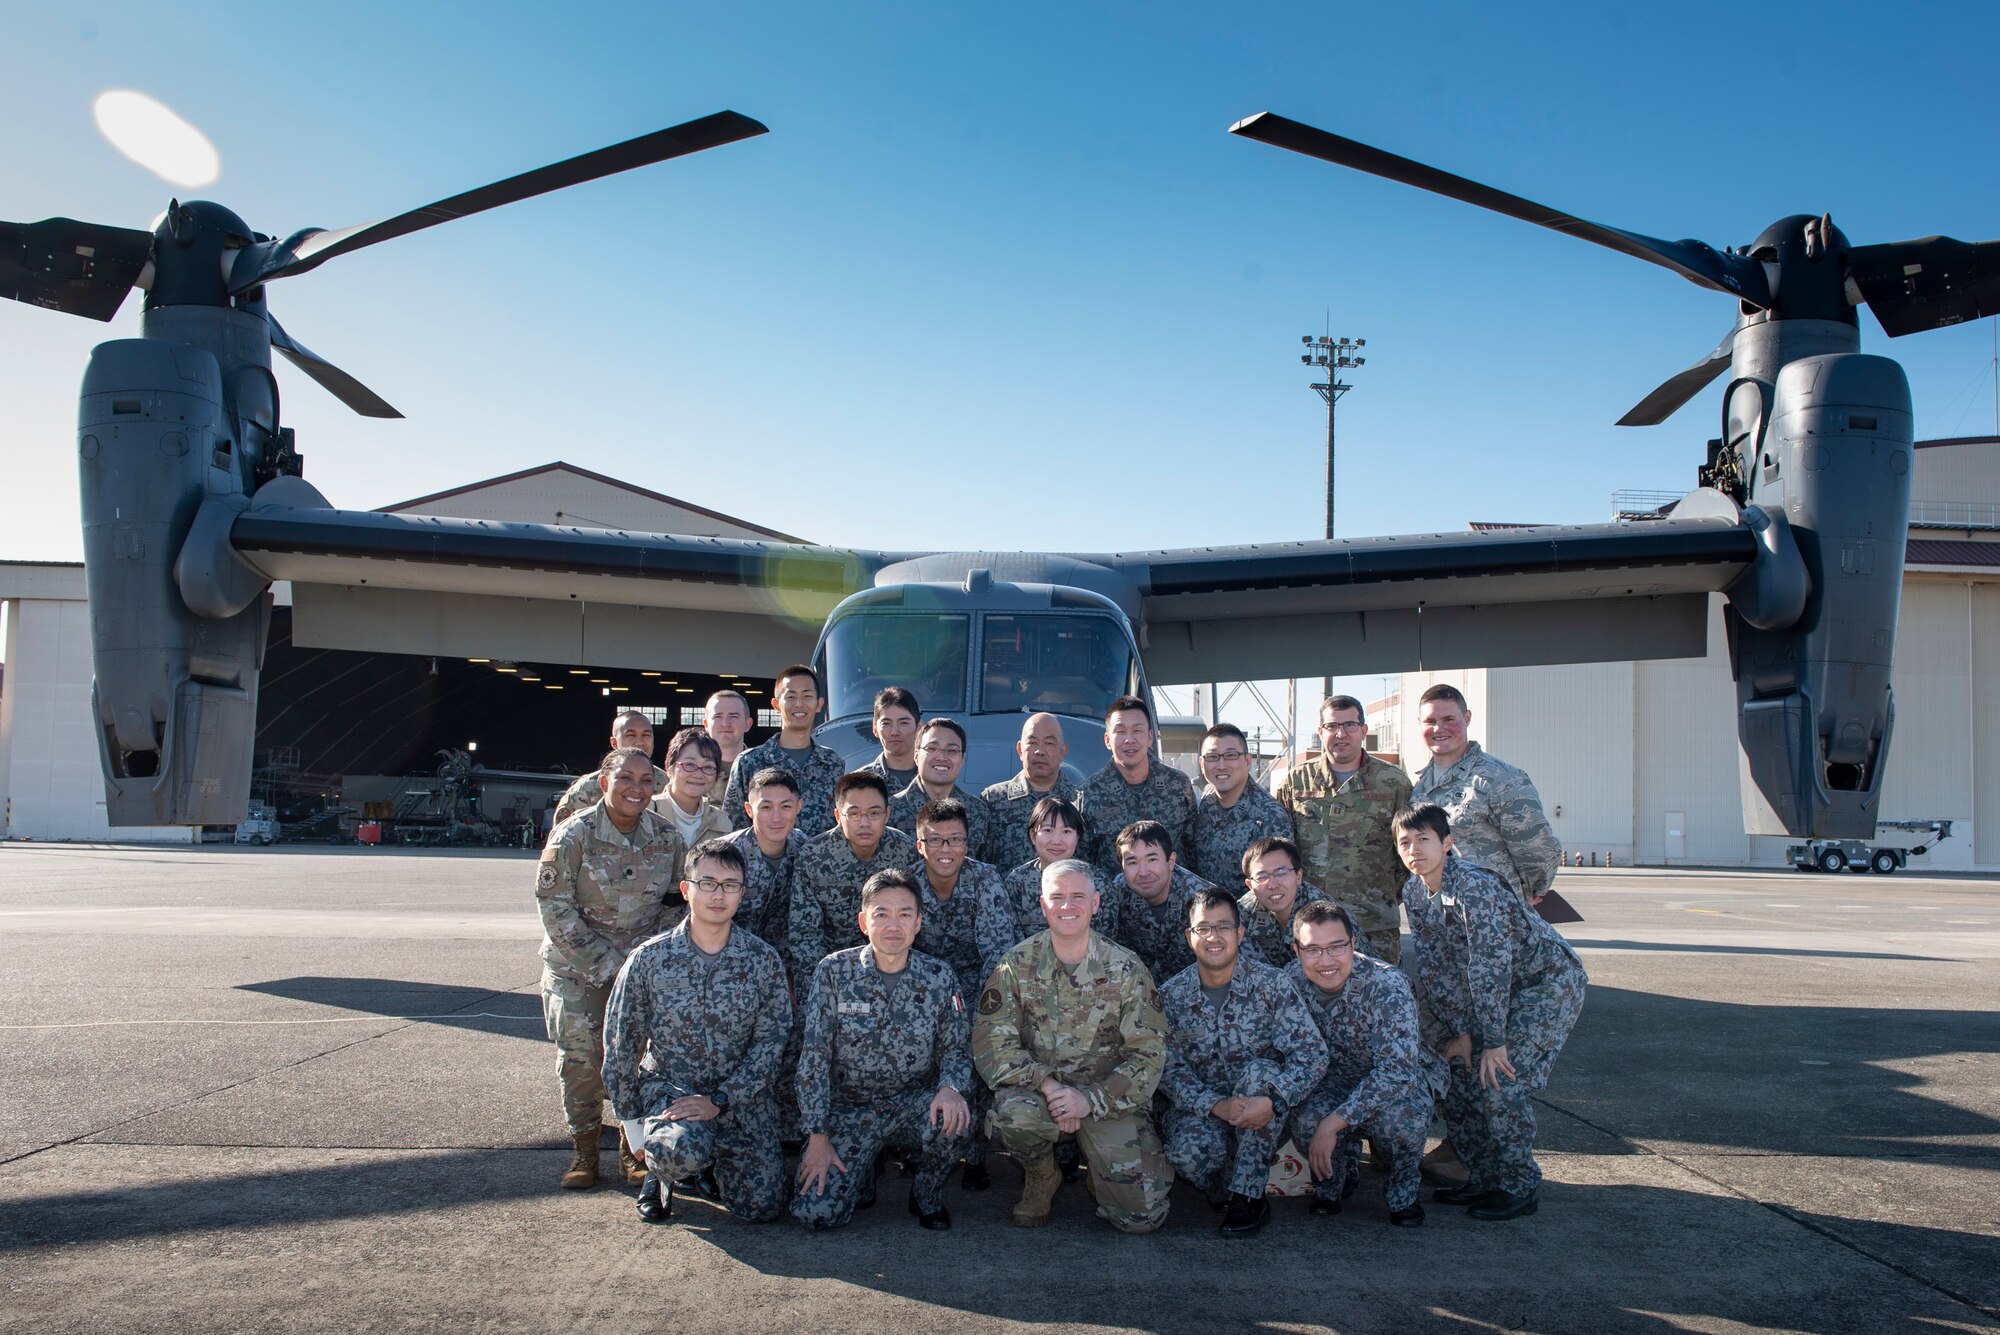 U.S. Air Force and Japanese Air Self-Defense Force members pose for a photo in front of a CV-22 Osprey during a basic maintenance officer tour at Yokota Air Base, Japan, Nov. 21, 2019.